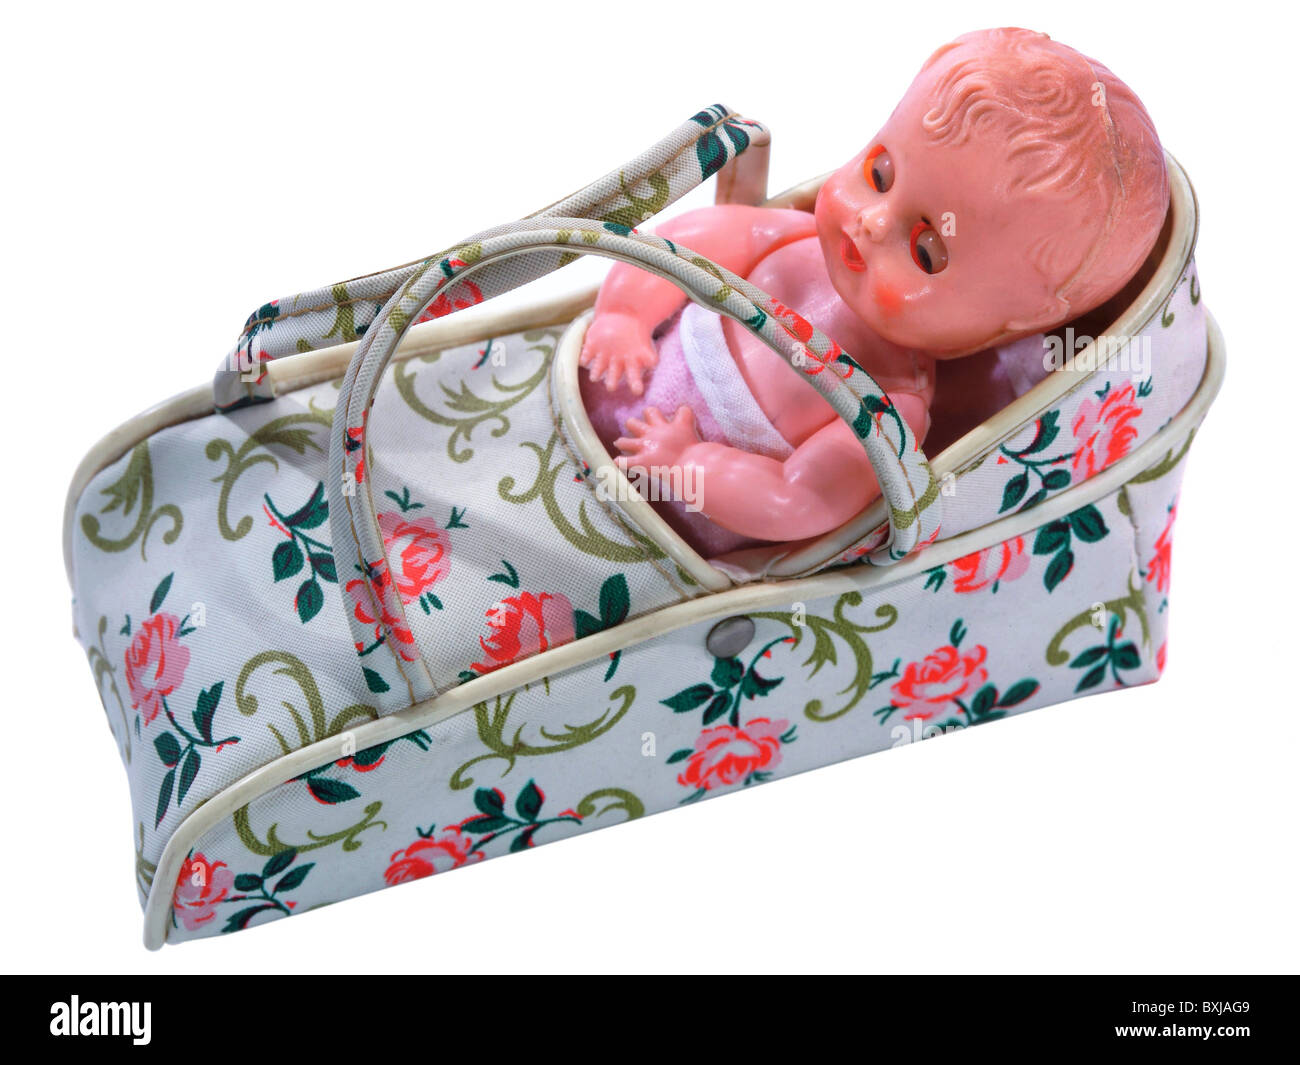 toys, doll, baby, carrier bag, Germany, circa 1958, Additional-Rights-Clearences-Not Available Stock Photo